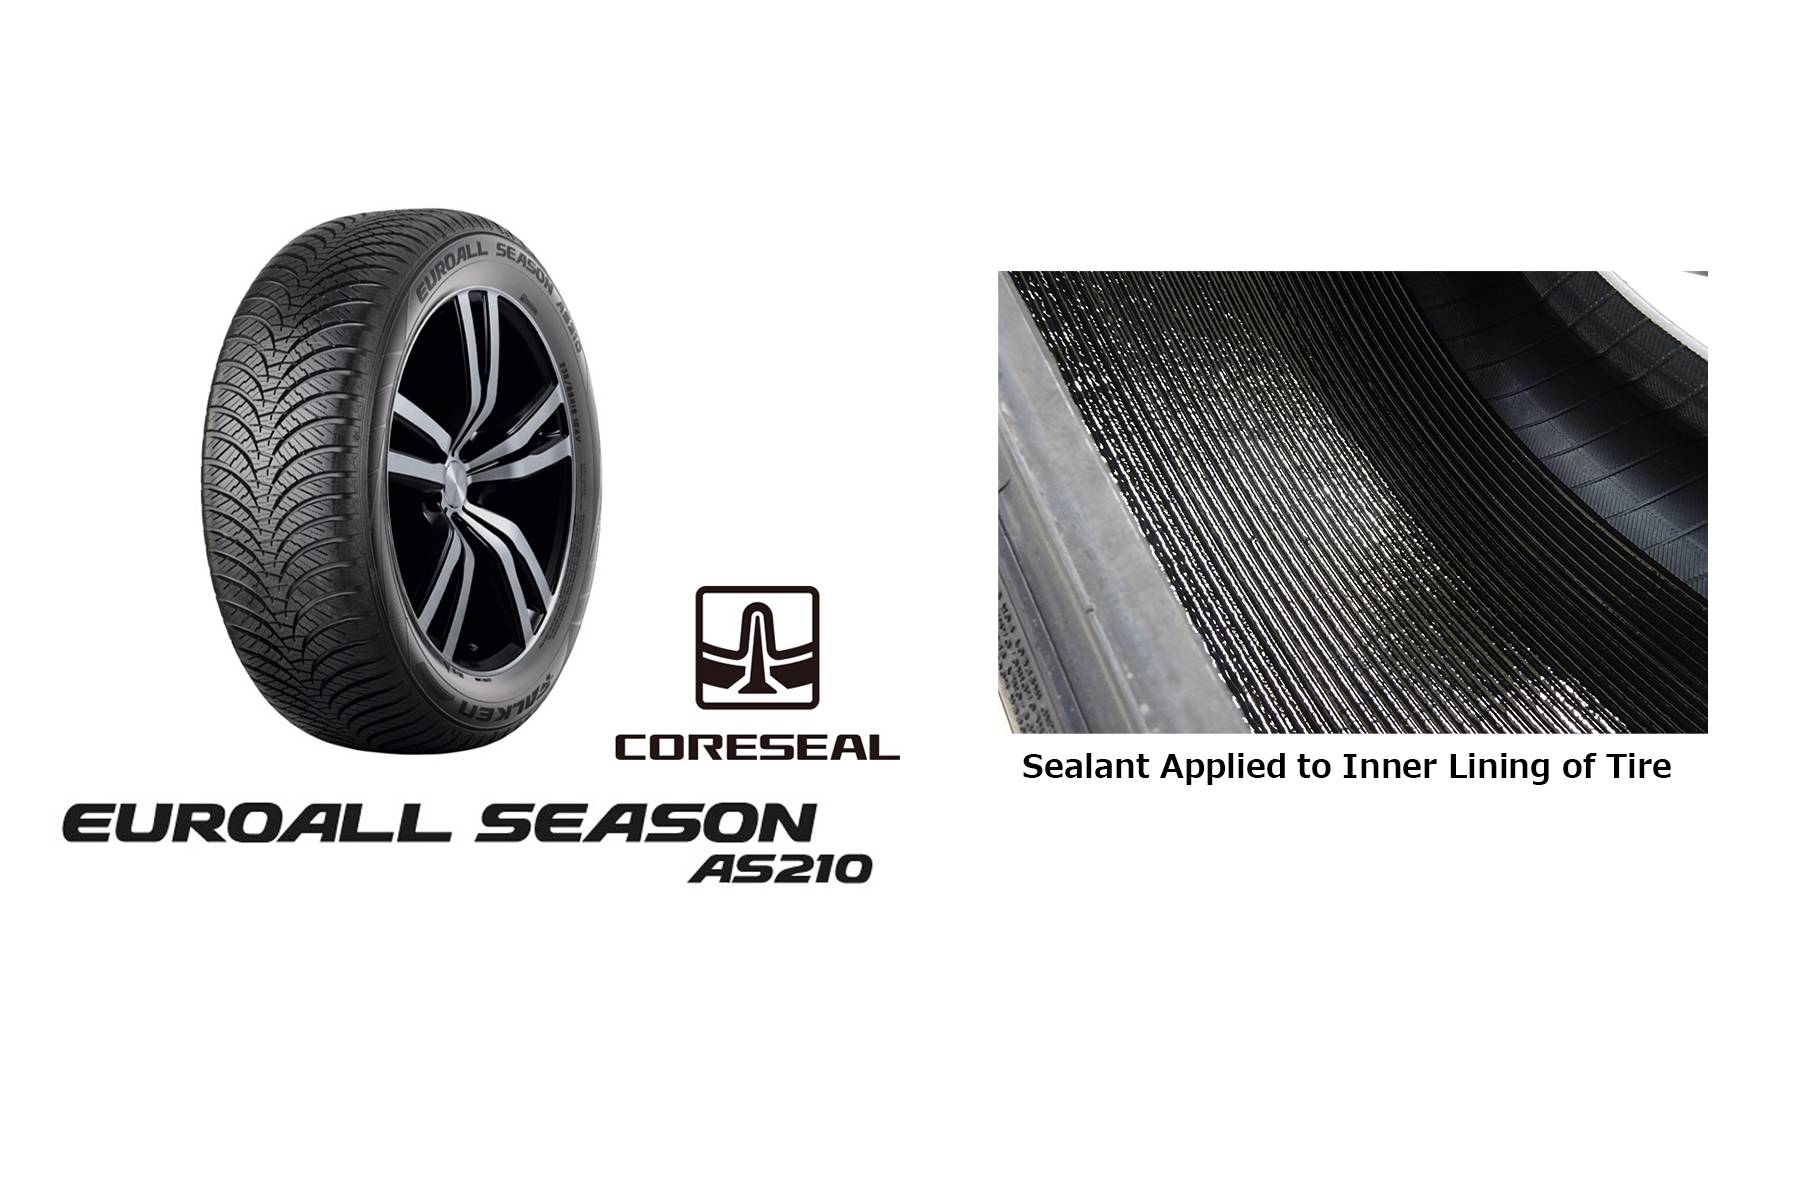 FALKEN EUROALL SEASON AS210 Released in Germany as First Tire to Feature  CORESEAL Technology for the Prevention of Air Leaks | FALKEN Global Website | Autoreifen